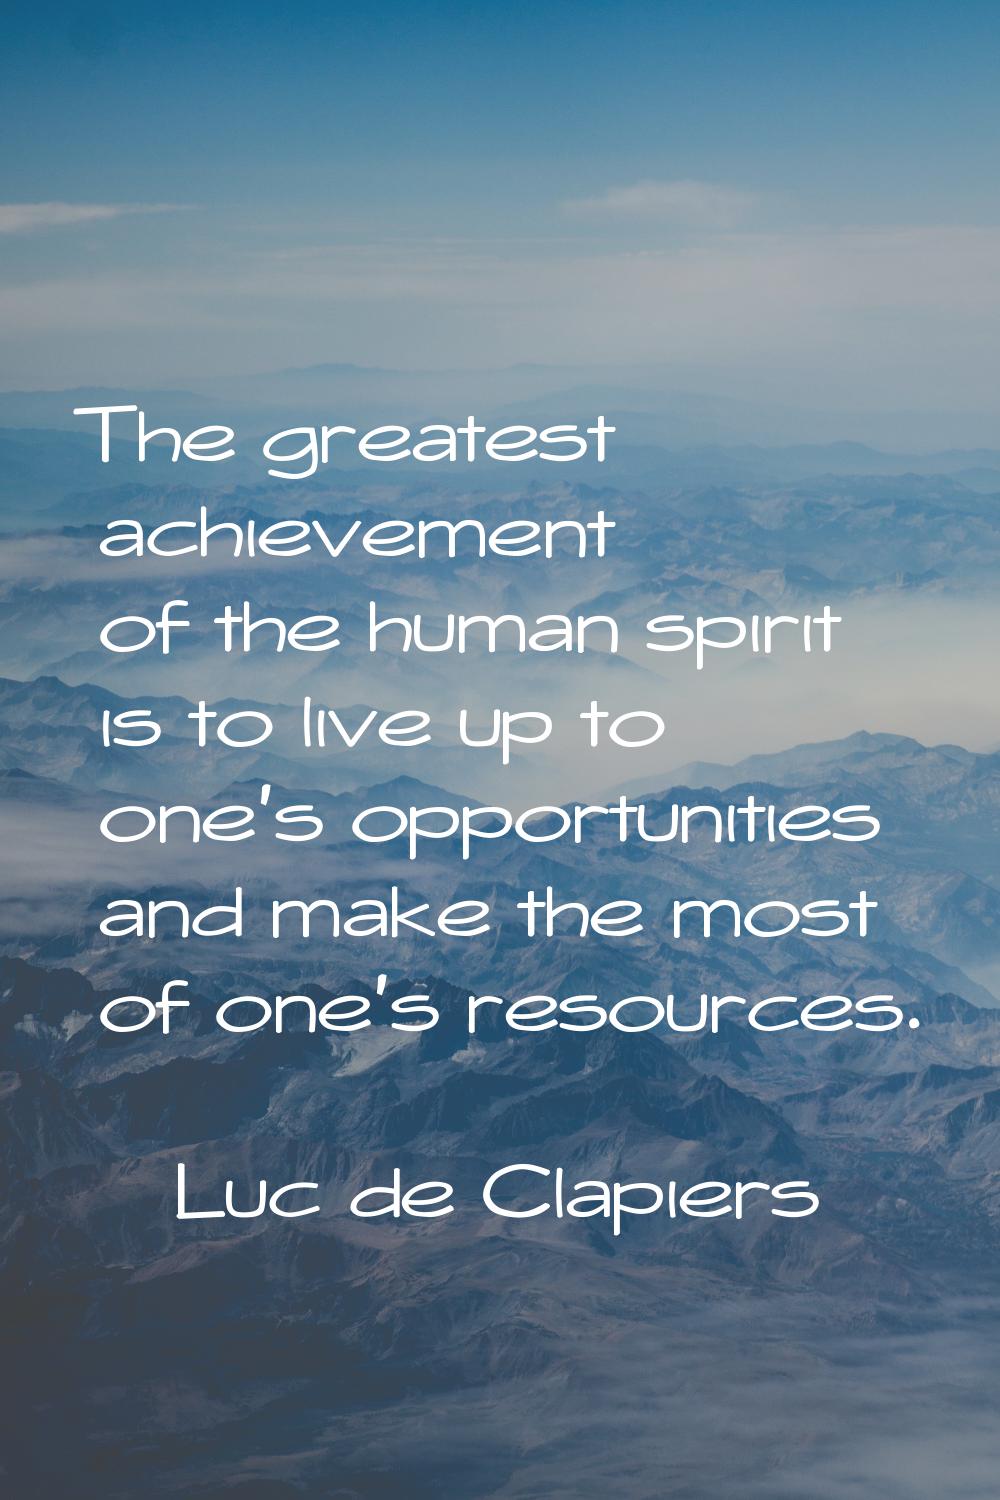 The greatest achievement of the human spirit is to live up to one's opportunities and make the most